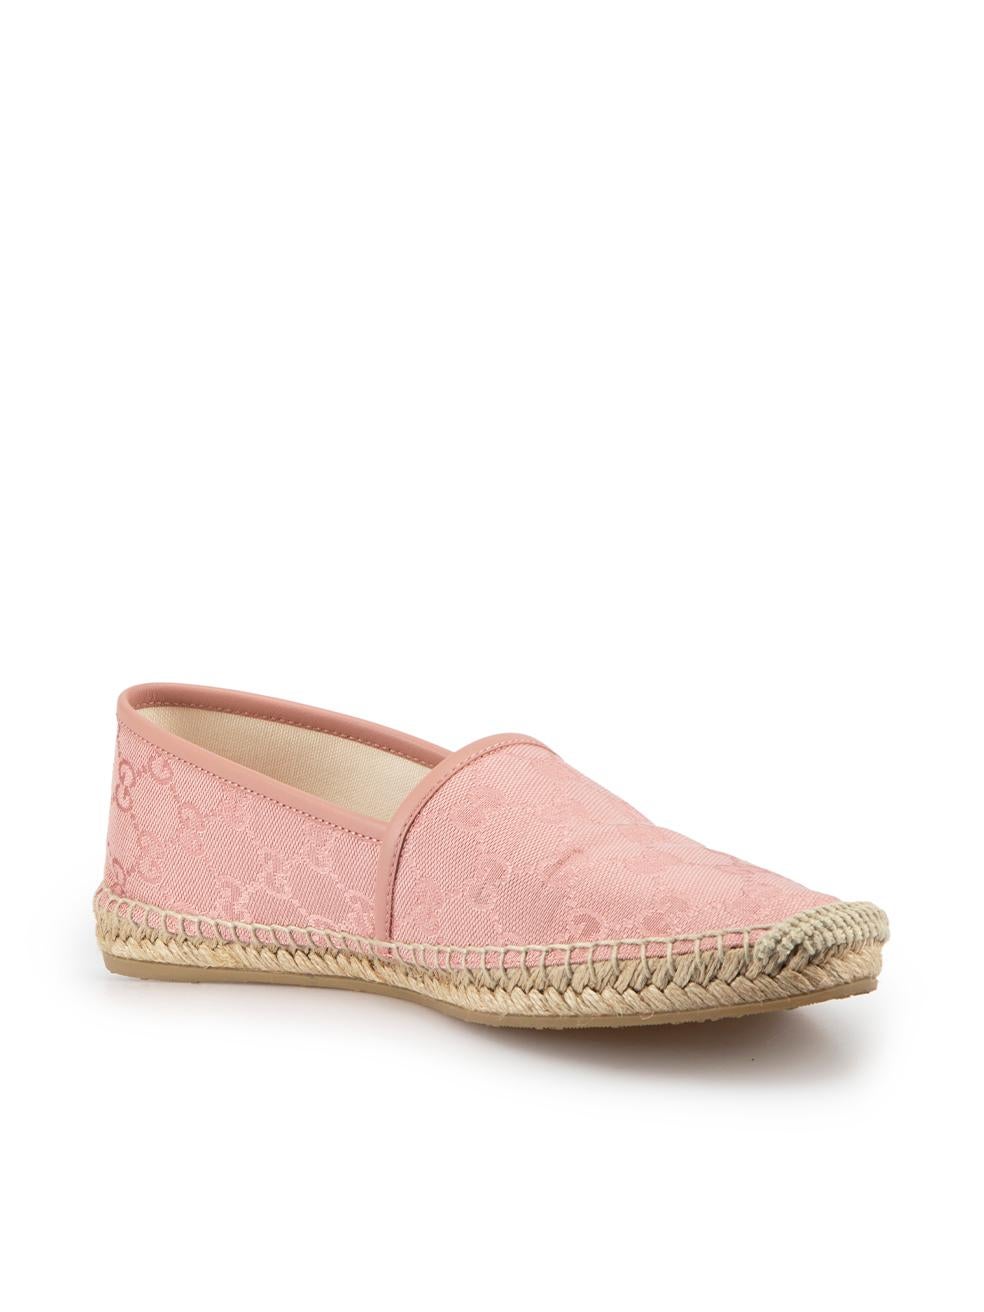 CONDITION is Very good. Minimal wear to espadrilles is evident. Minimal creasing to back heels on this used Gucci designer resale item.

Details
Pink
Cloth
Espadrille flats
Round toe
Slip on
'GG' logo pattern
  
Made in Spain

Composition
EXTERIOR: